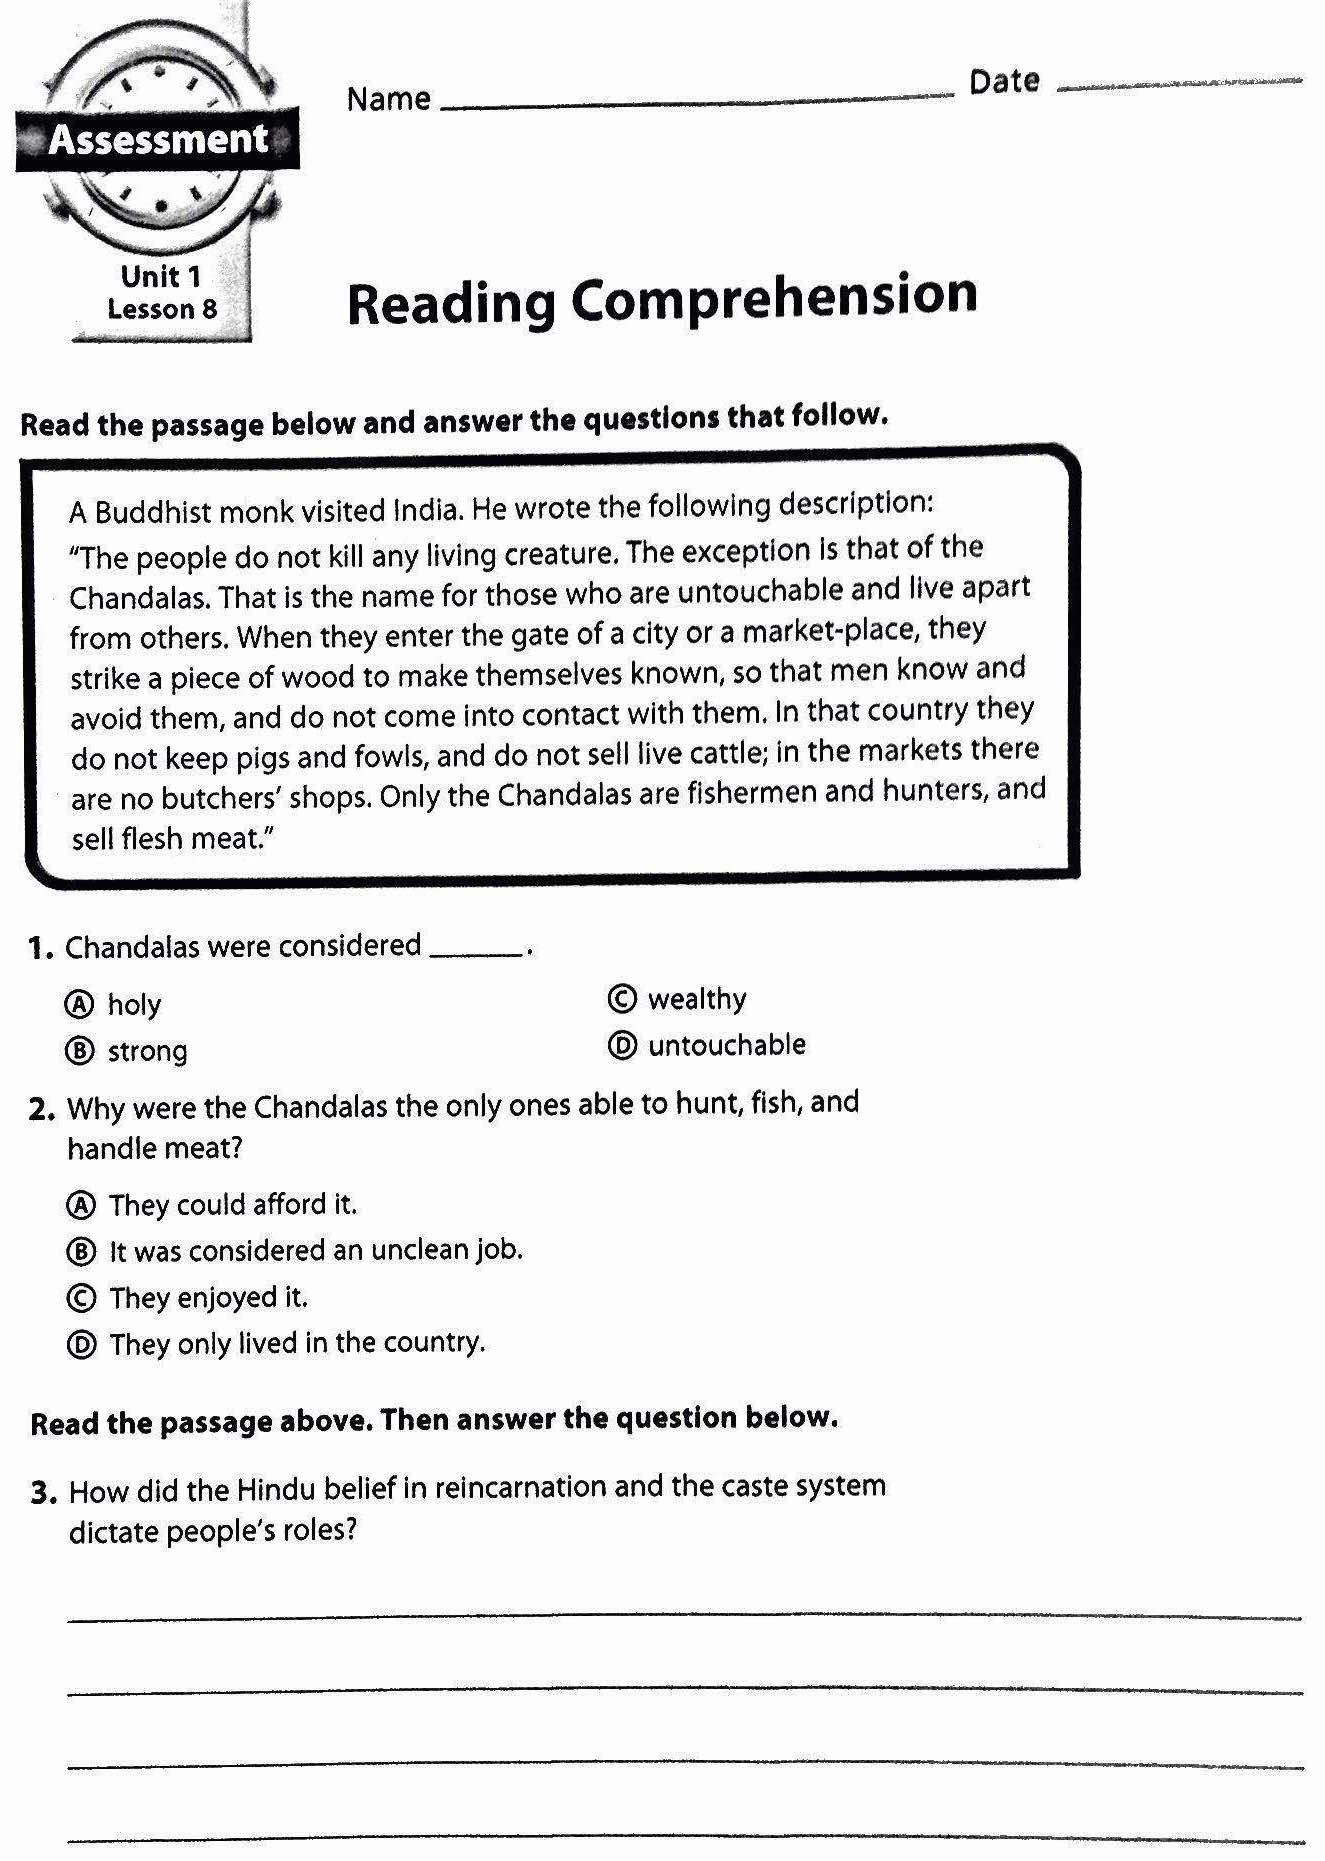 Reading Comprehension – Caste System  Mr Proehl's Social Studies Class Throughout Mesopotamia Reading Comprehension Worksheets